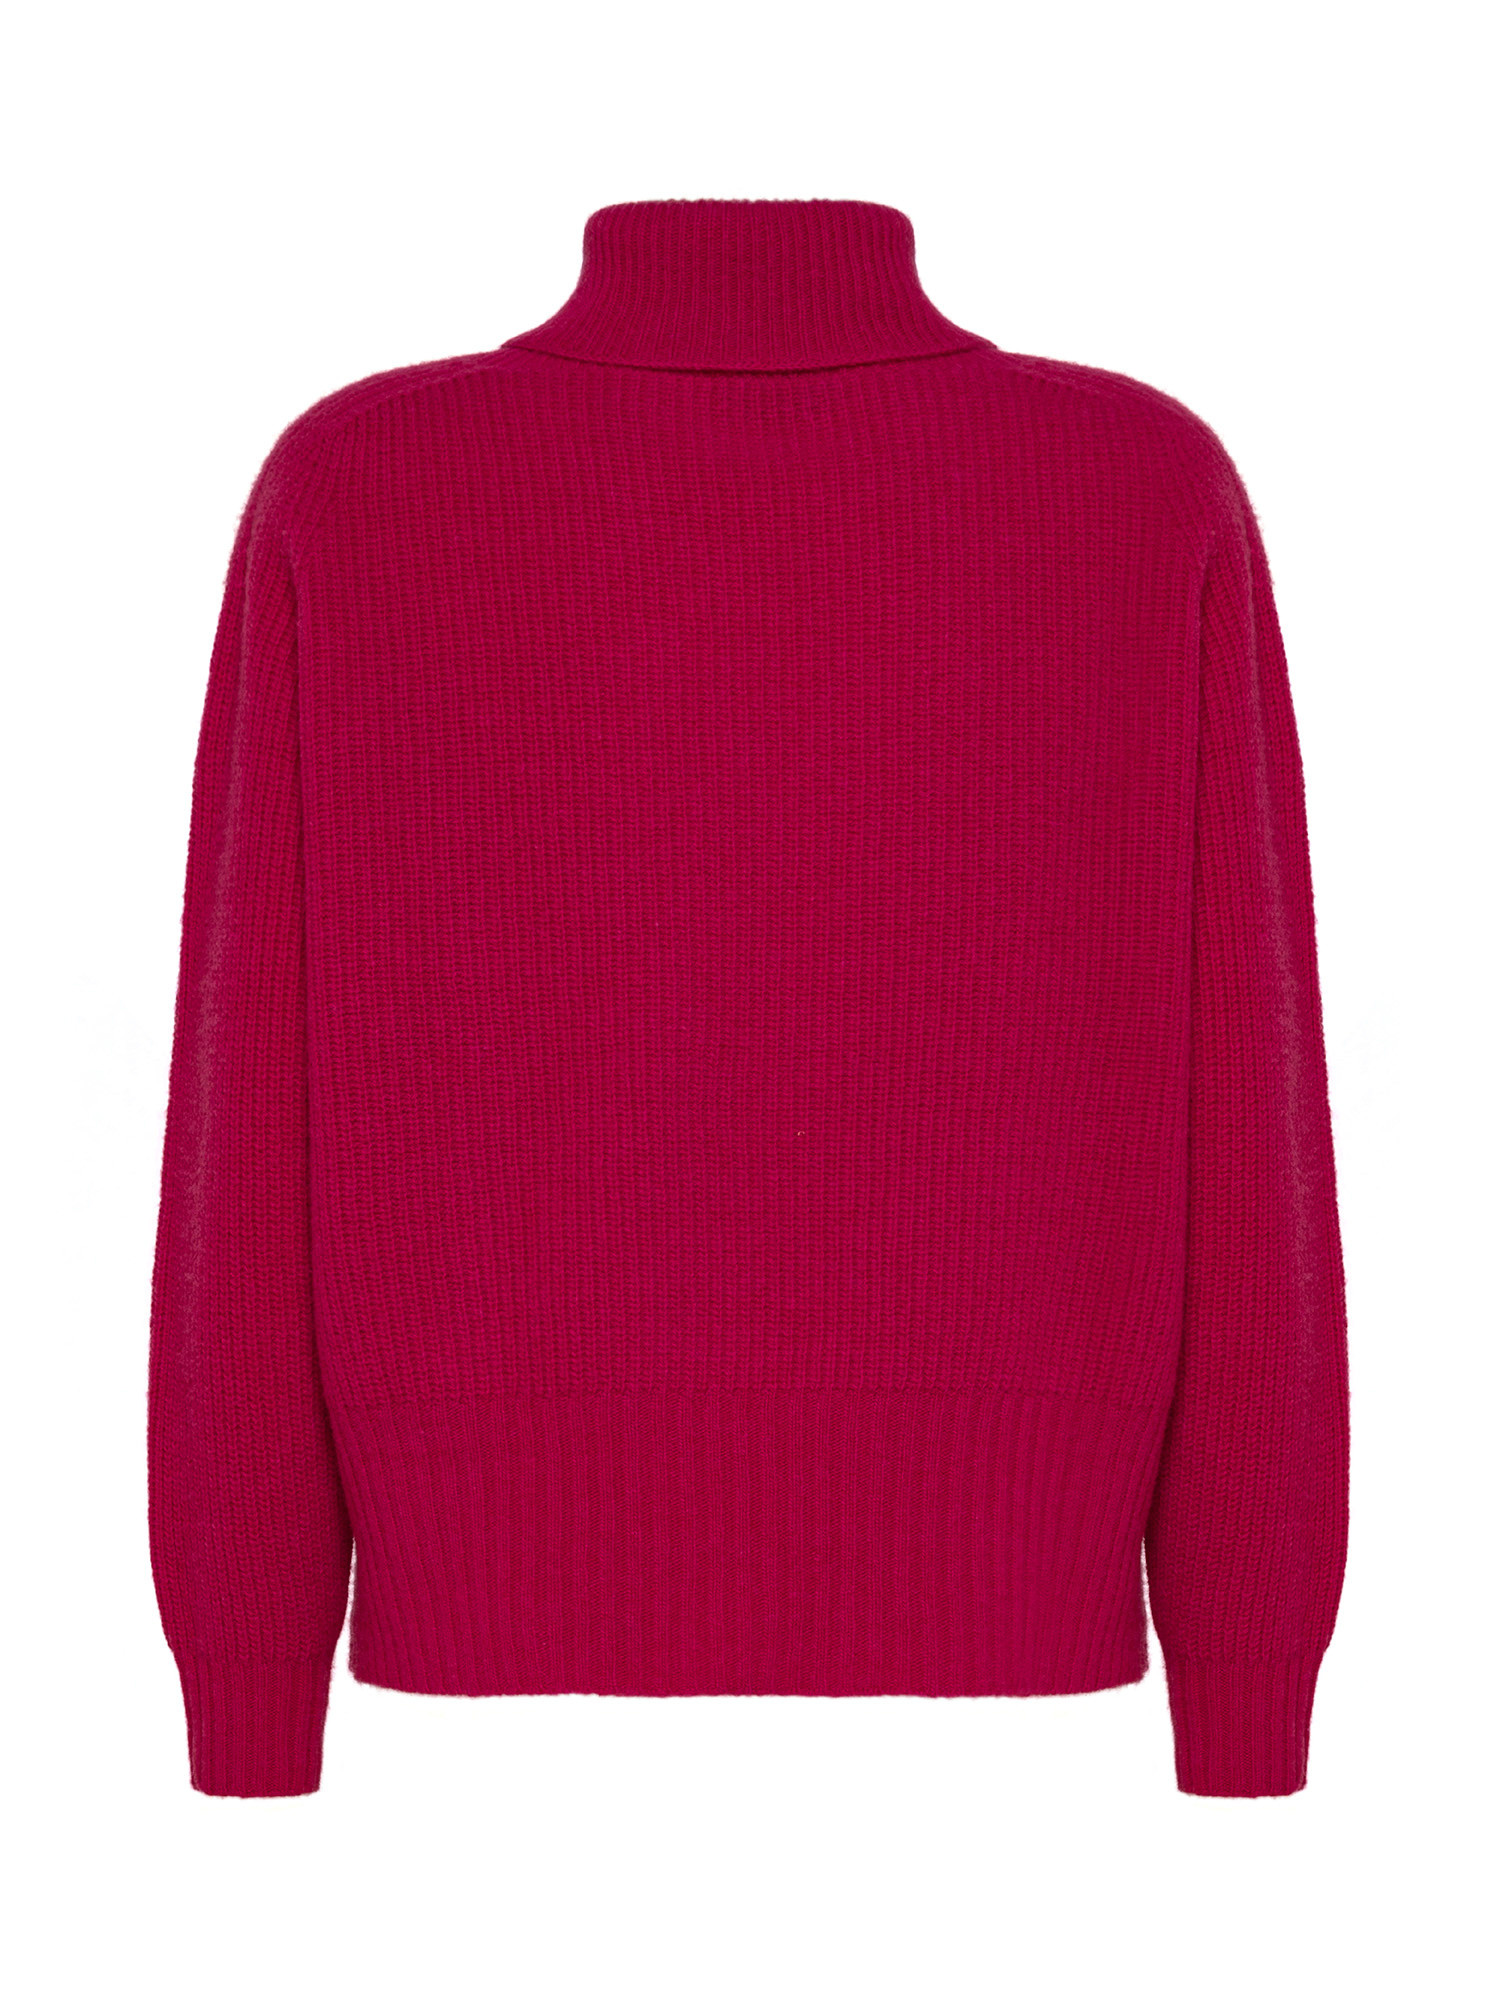 K Collection - Carded wool turtleneck pullover, Pink Fuchsia, large image number 1